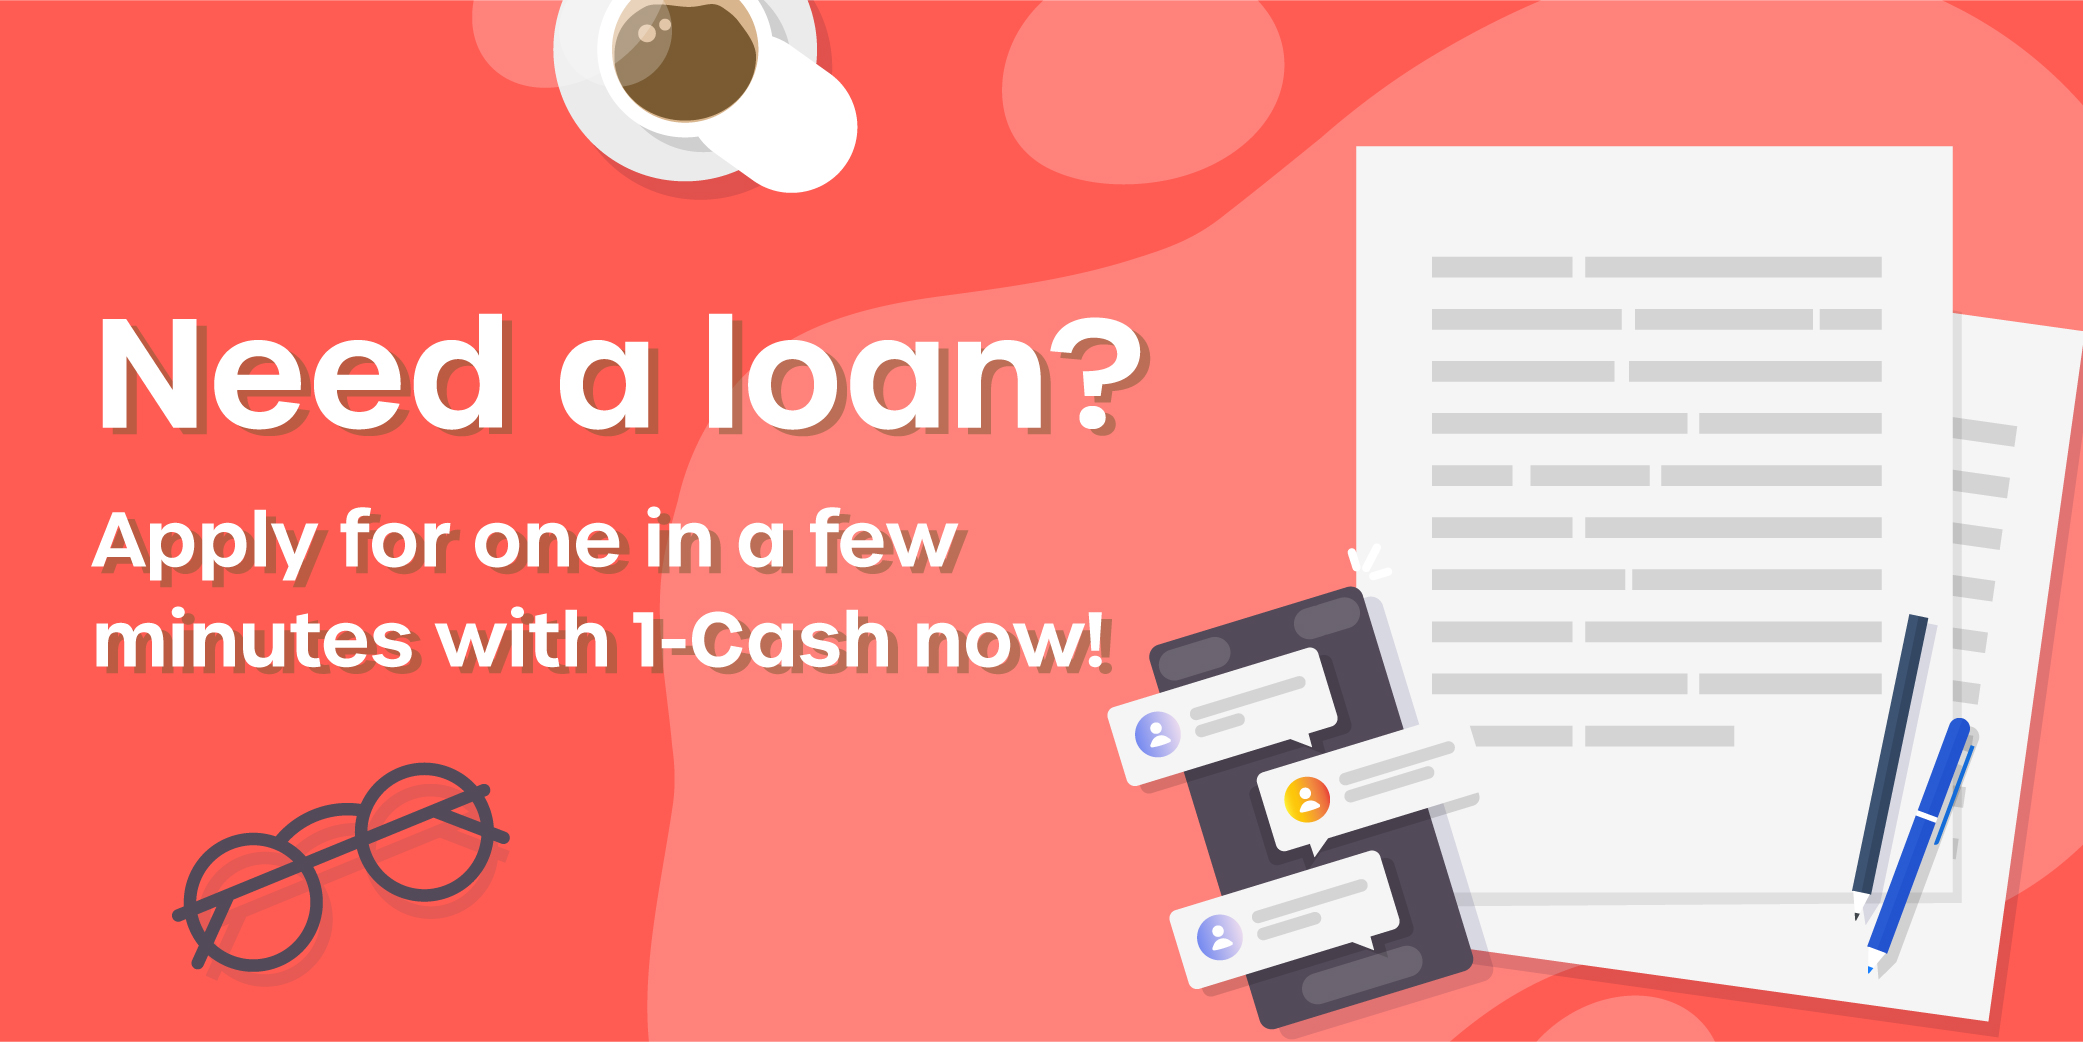 Clickable banner to apply for a loan